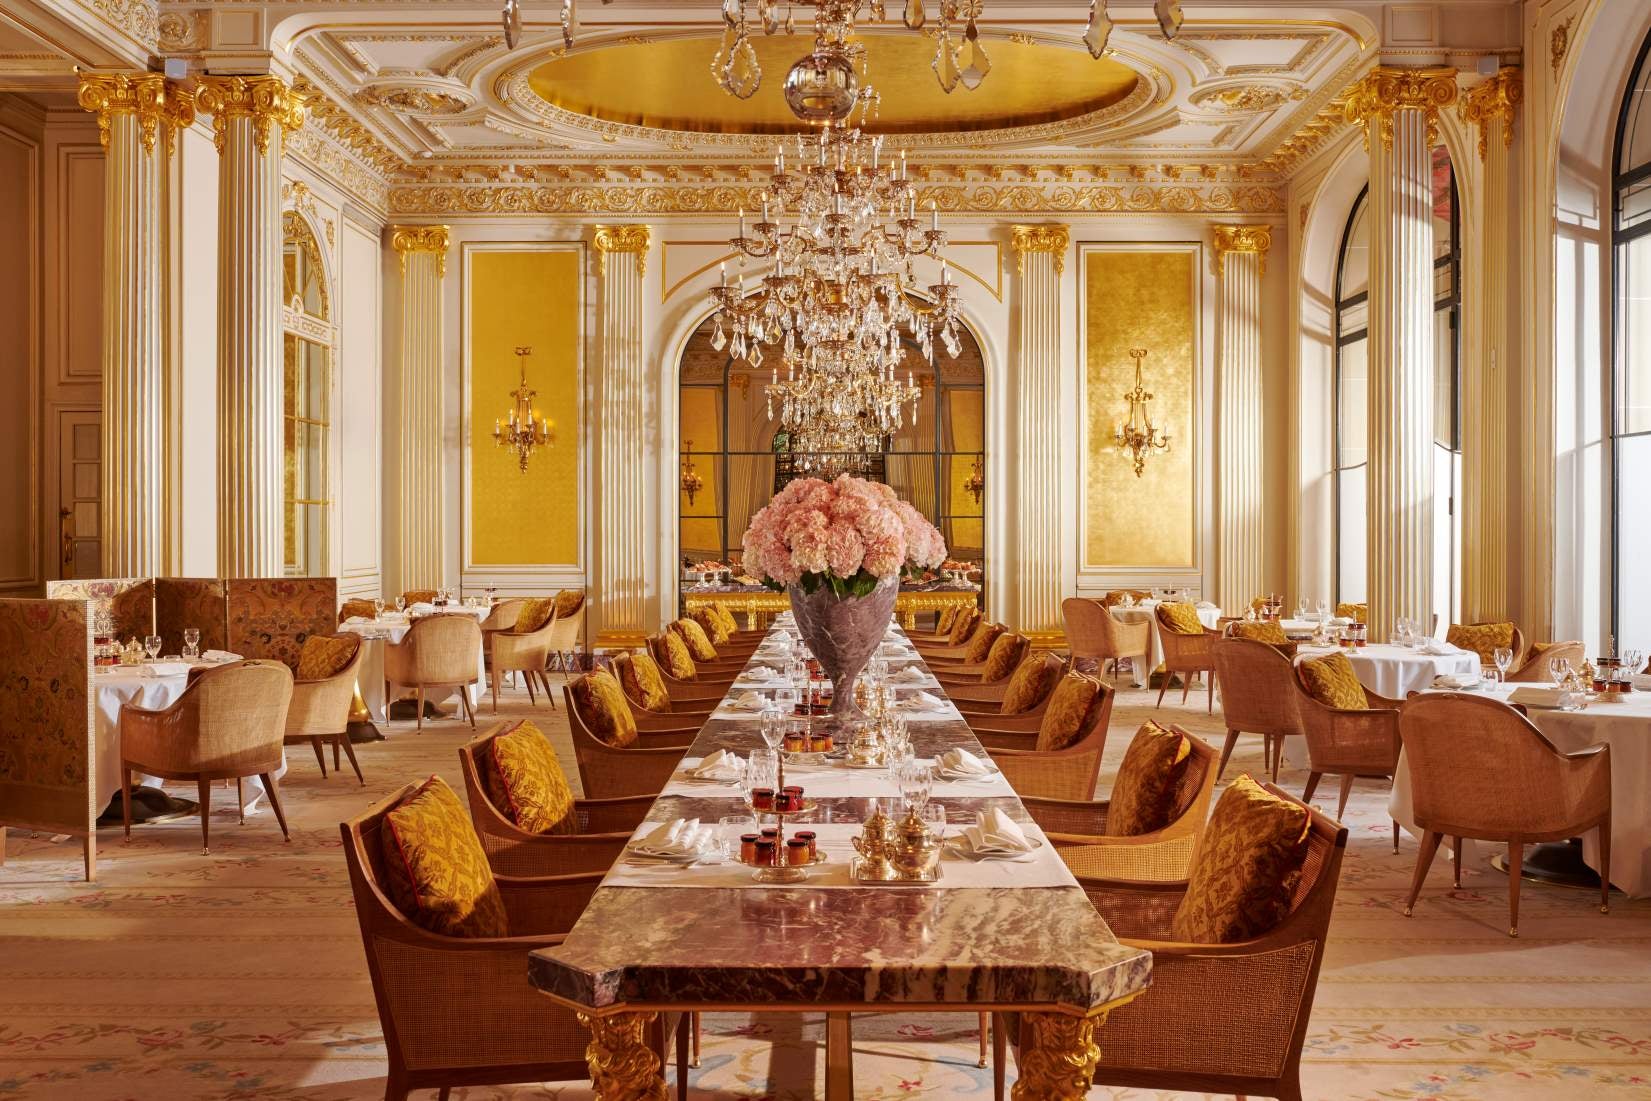 Image showing the golden breakfast room at Hôtel Plaza Athénée in Paris